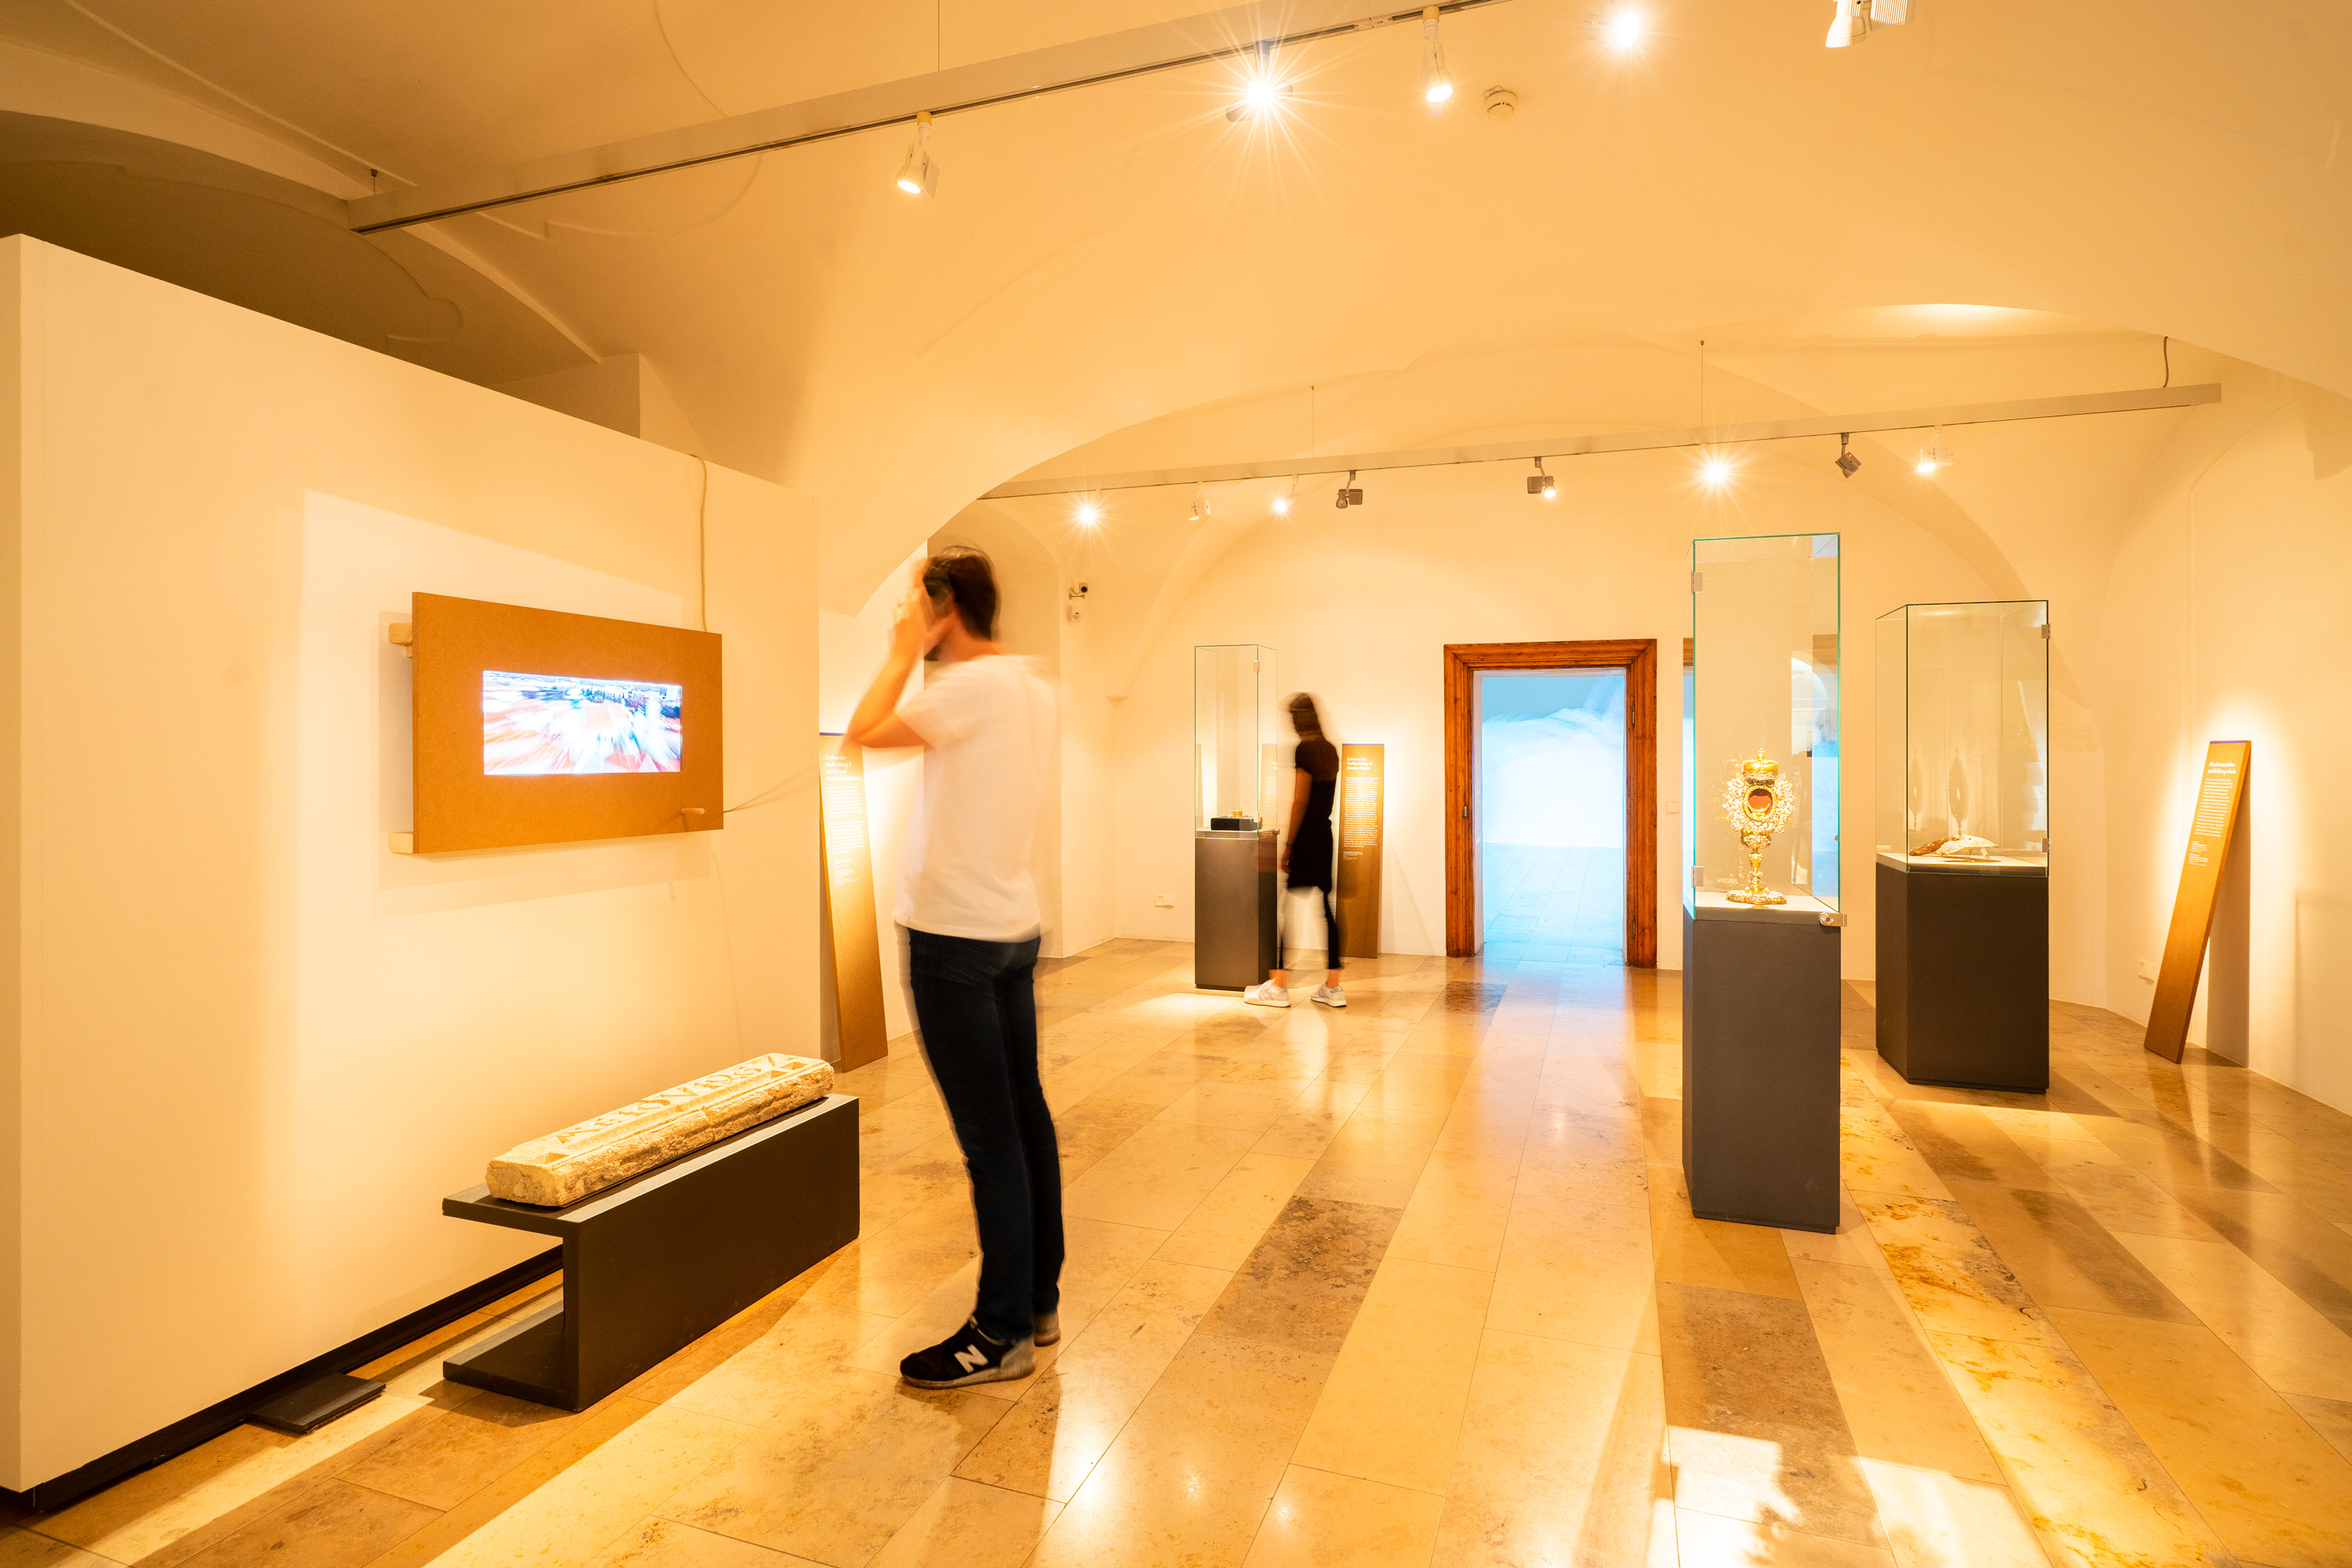 Exhibition space with objects and a screen embedded in MDF panels, in front of which a man stands